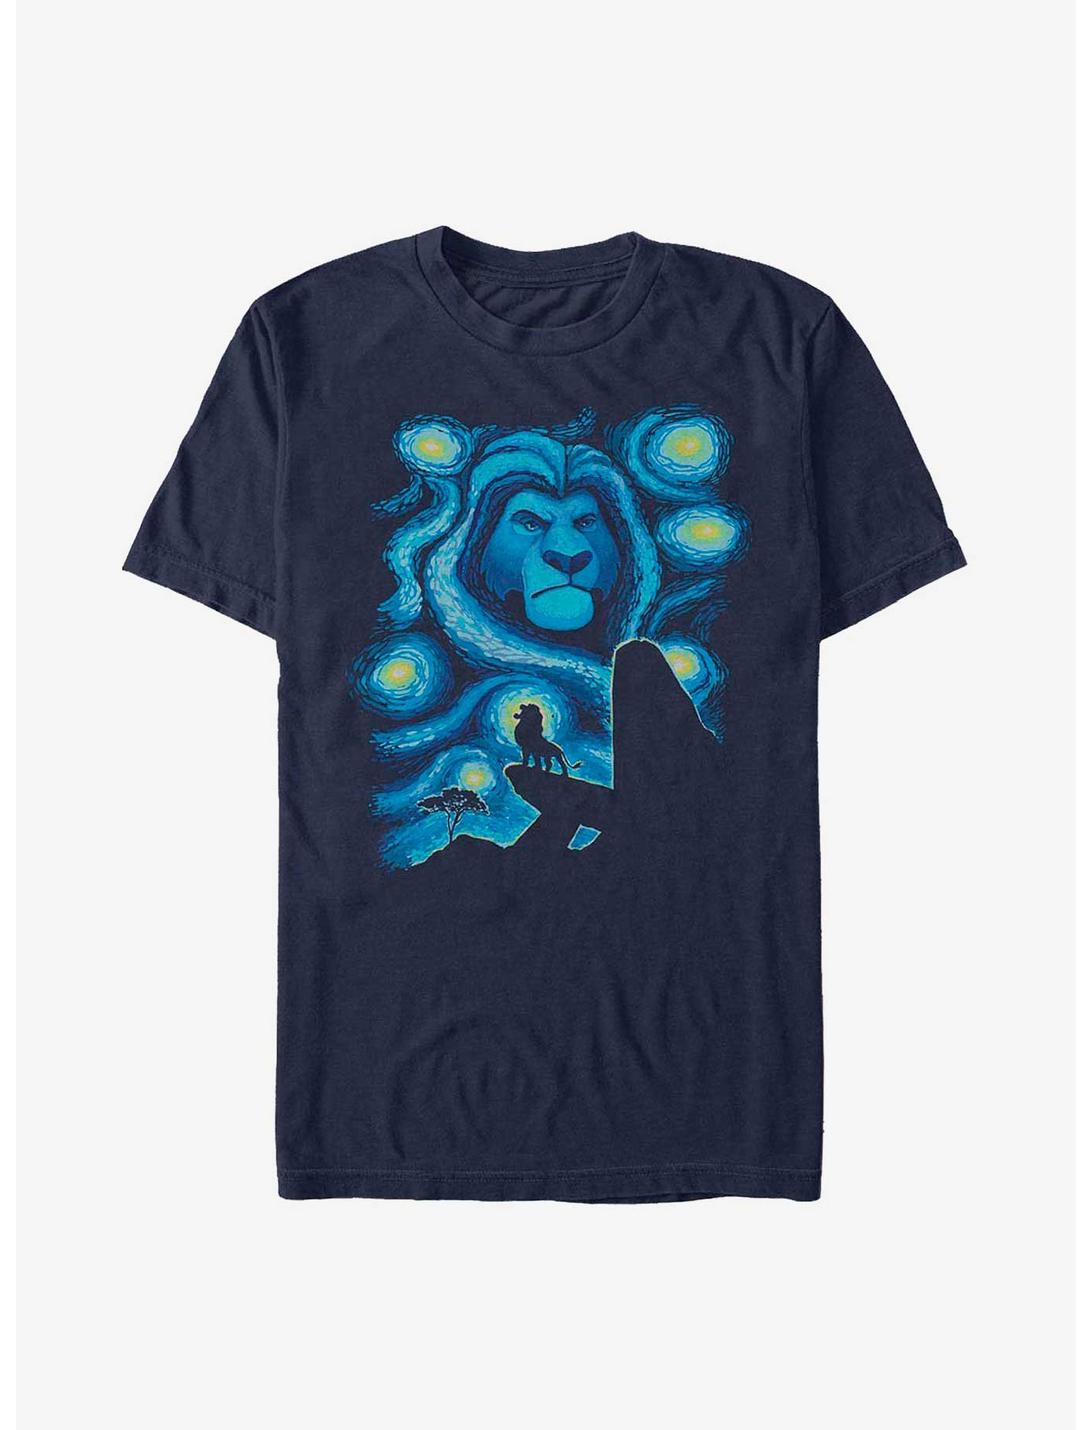 Disney The Lion King Starry Pridelands Mufasa and Simba T-Shirt, NAVY, hi-res